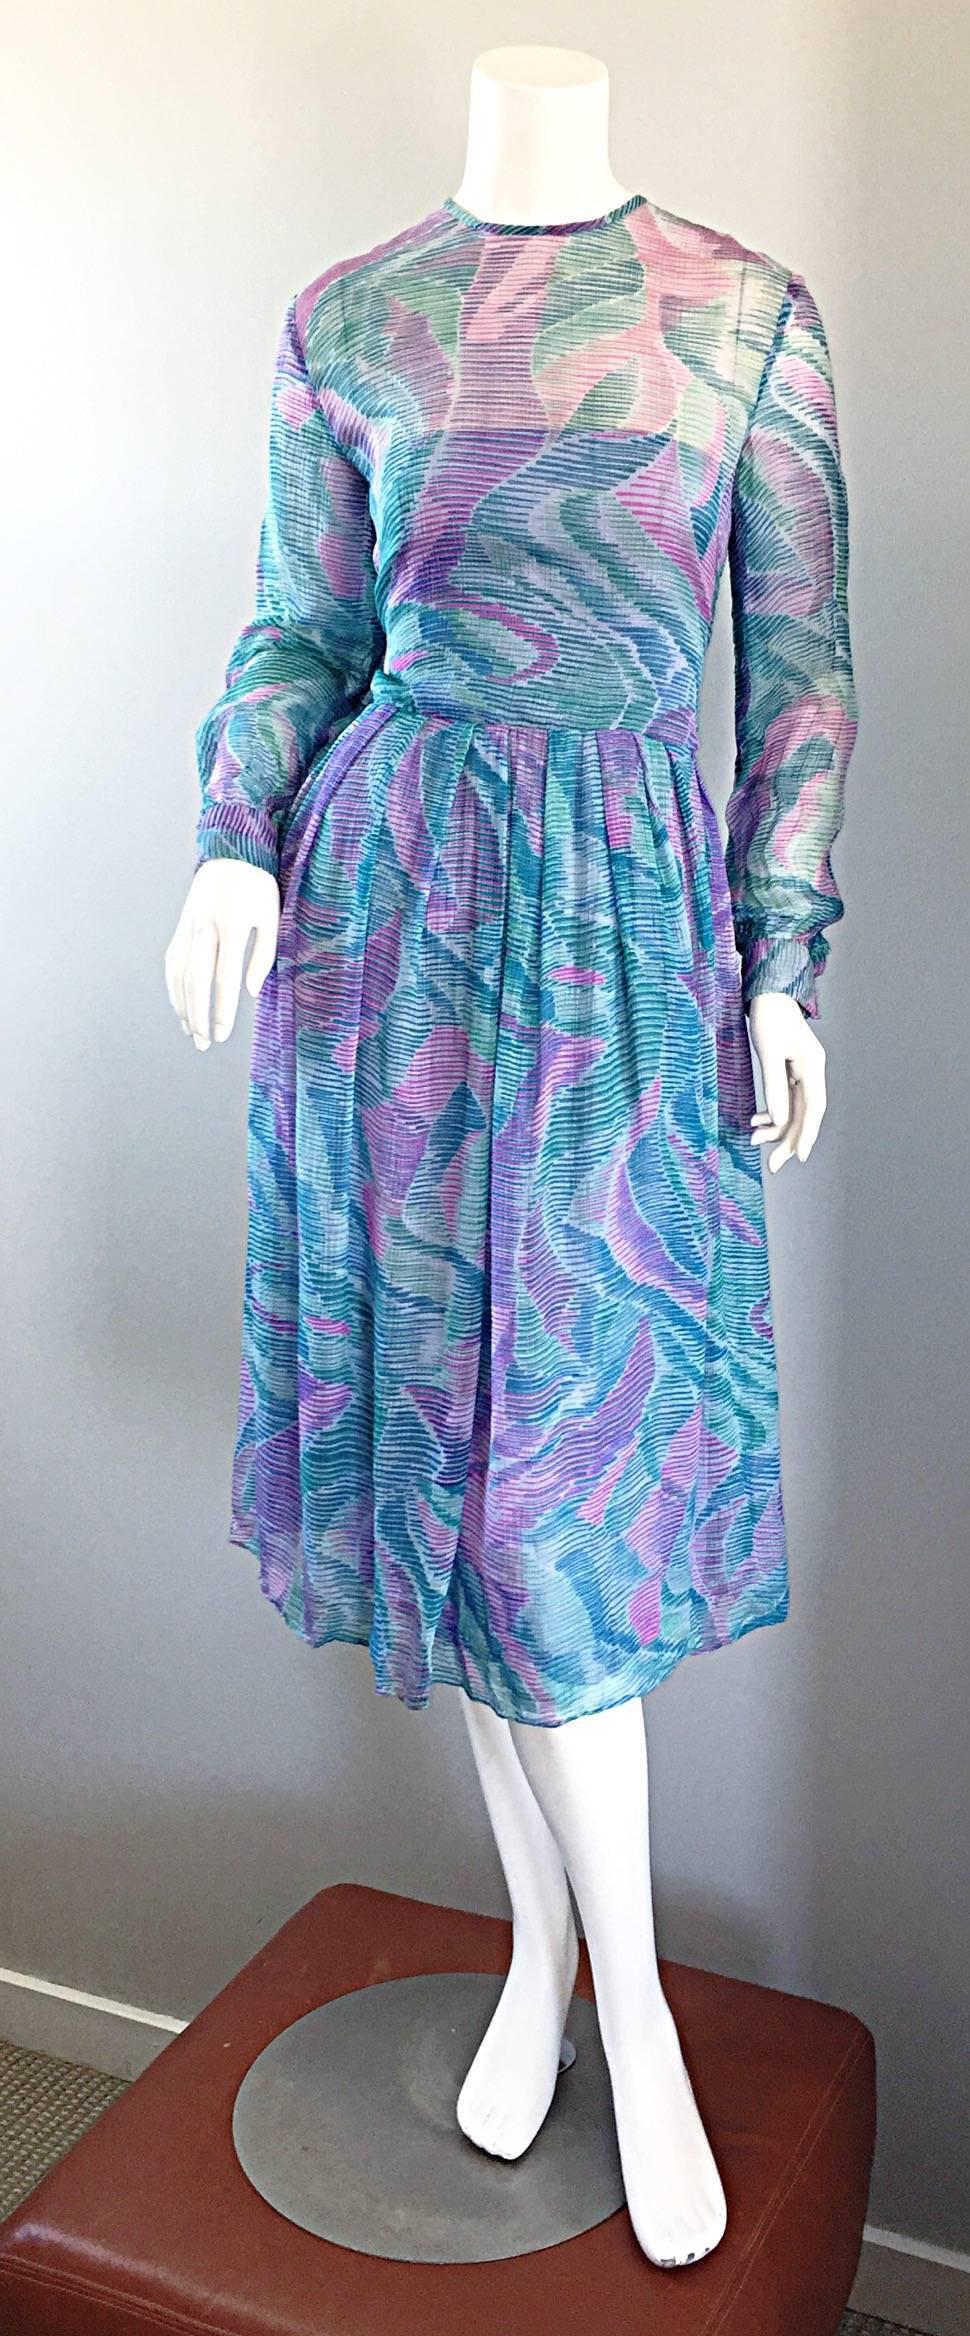 Beautiful late 1970s RICHILENE chiffon dress! Probably the finest and softest chiffon that I have ever felt. Such a pretty watercolor print in purple, pink, and teal! Semi sheer above the bust and sleeves. Wonderful tailored fit is super flattering!